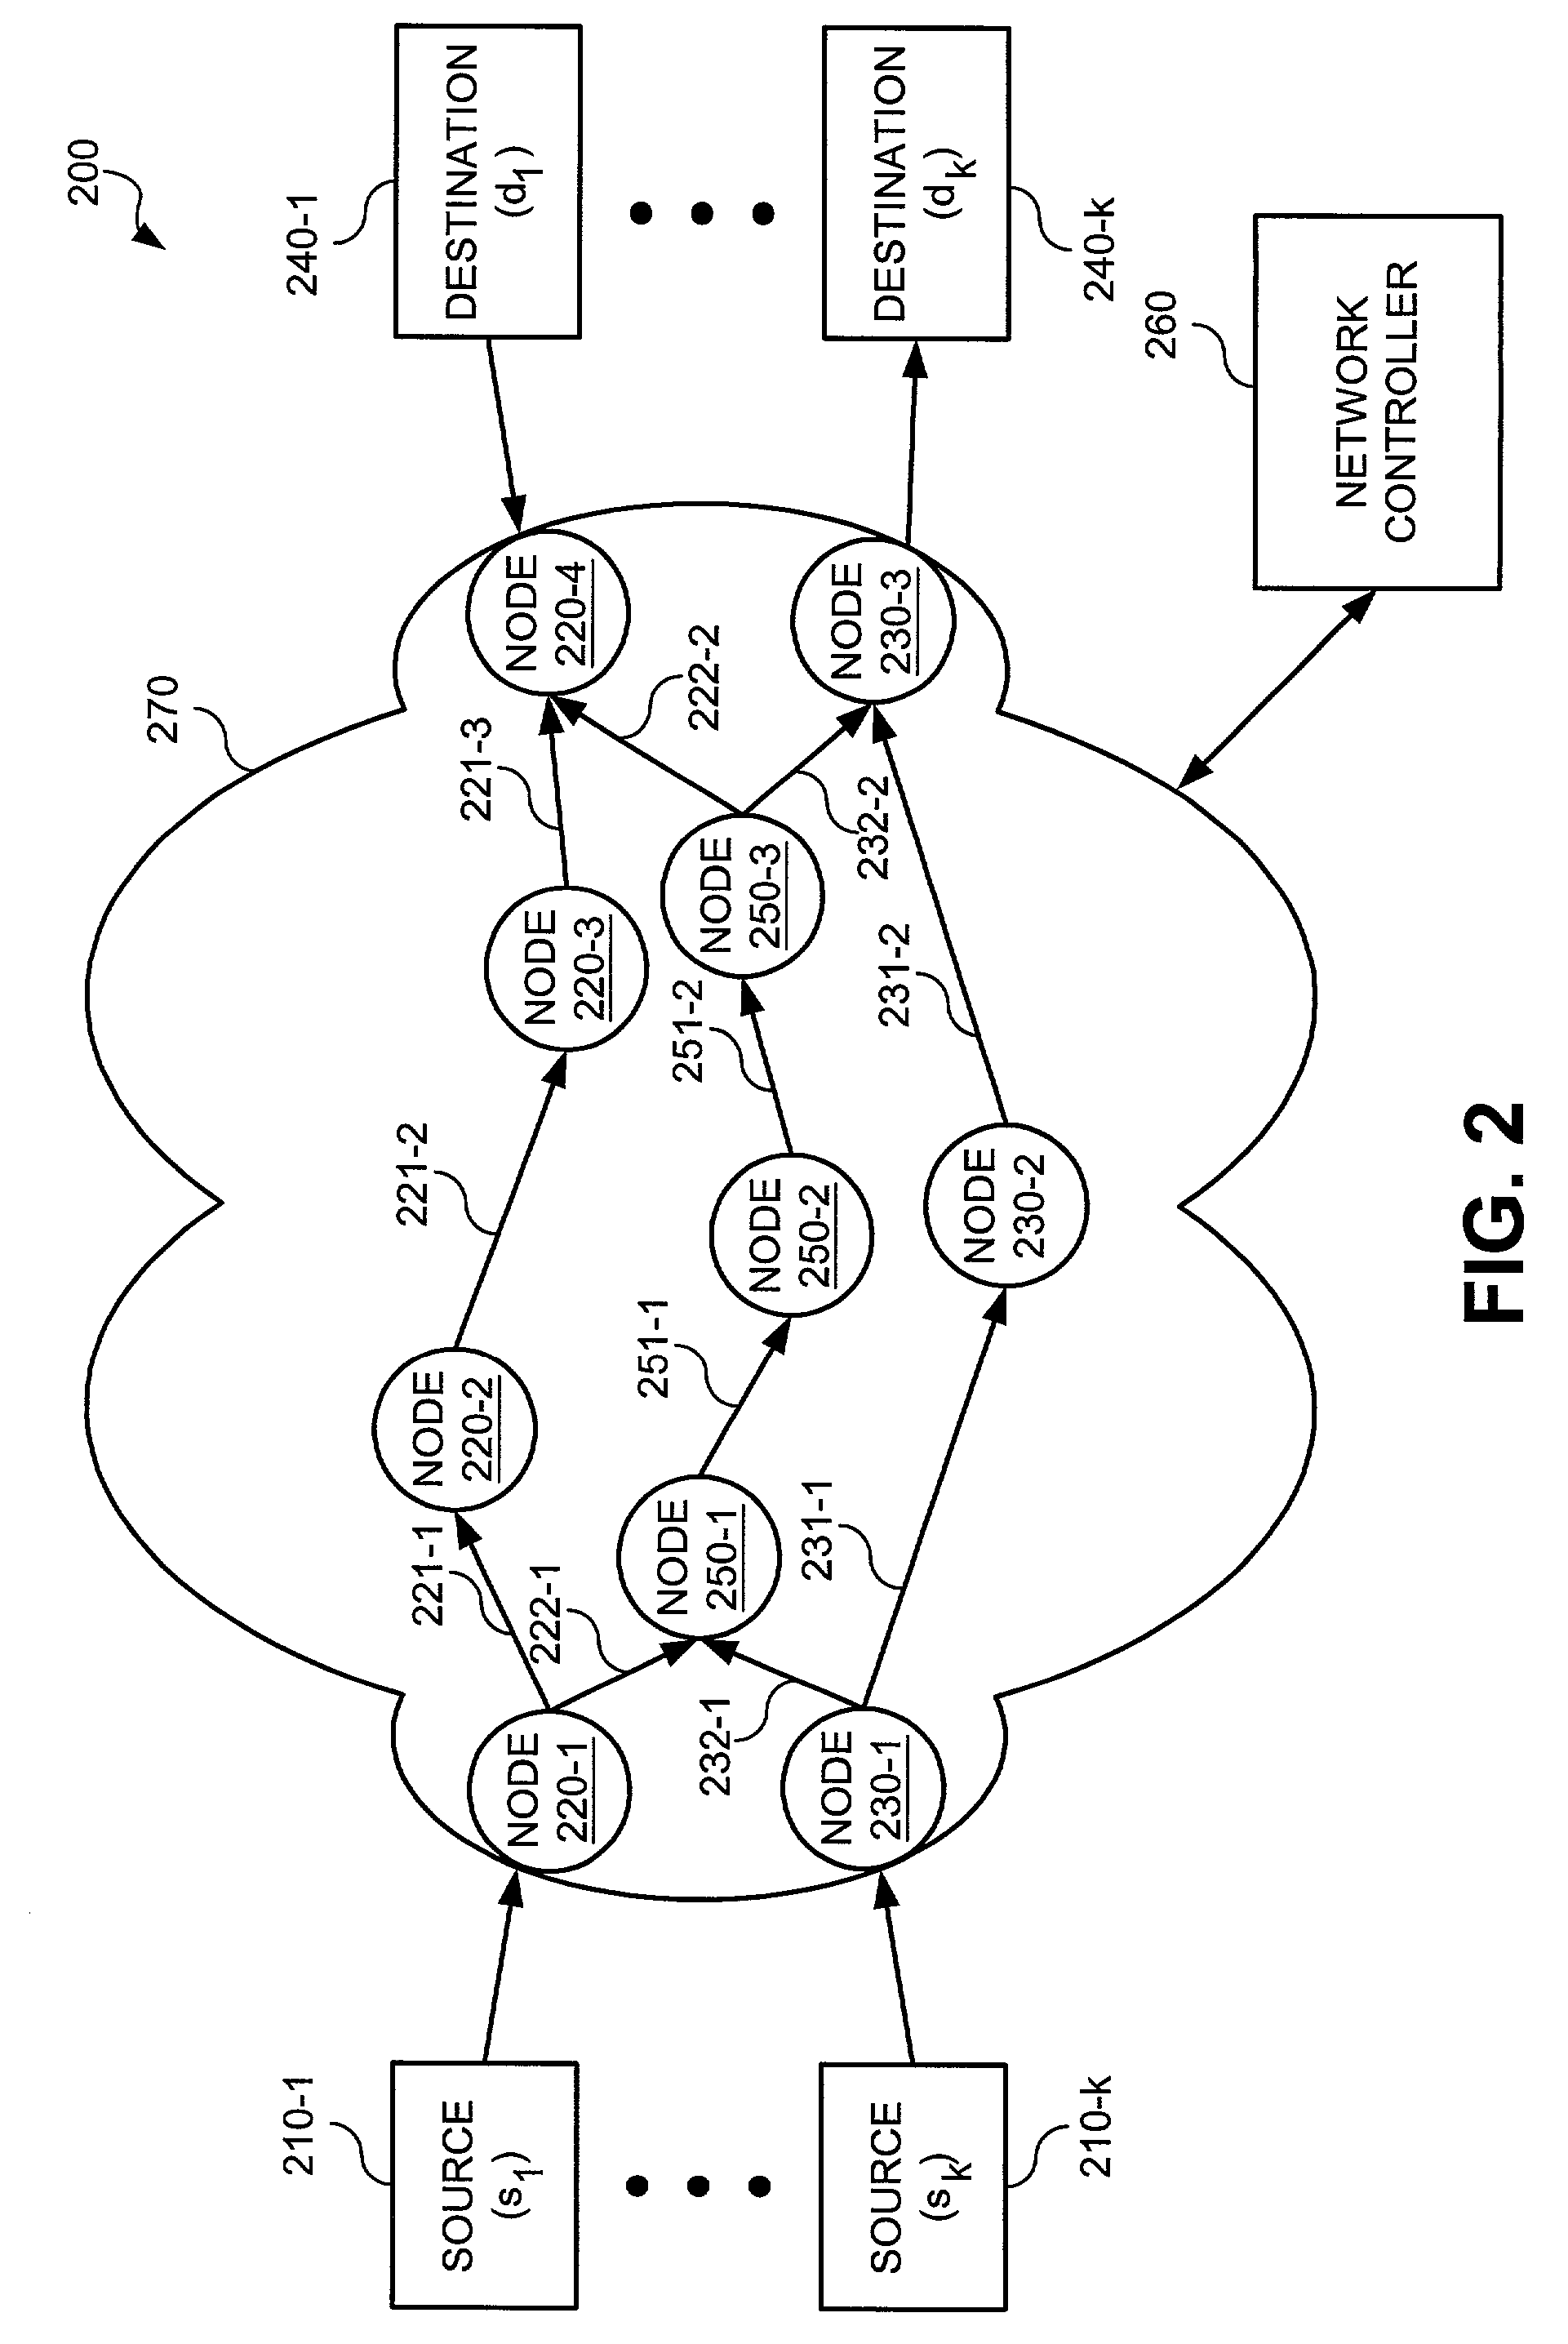 Fast and scalable approximation methods for finding minimum cost flows with shared recovery strategies, and system using same